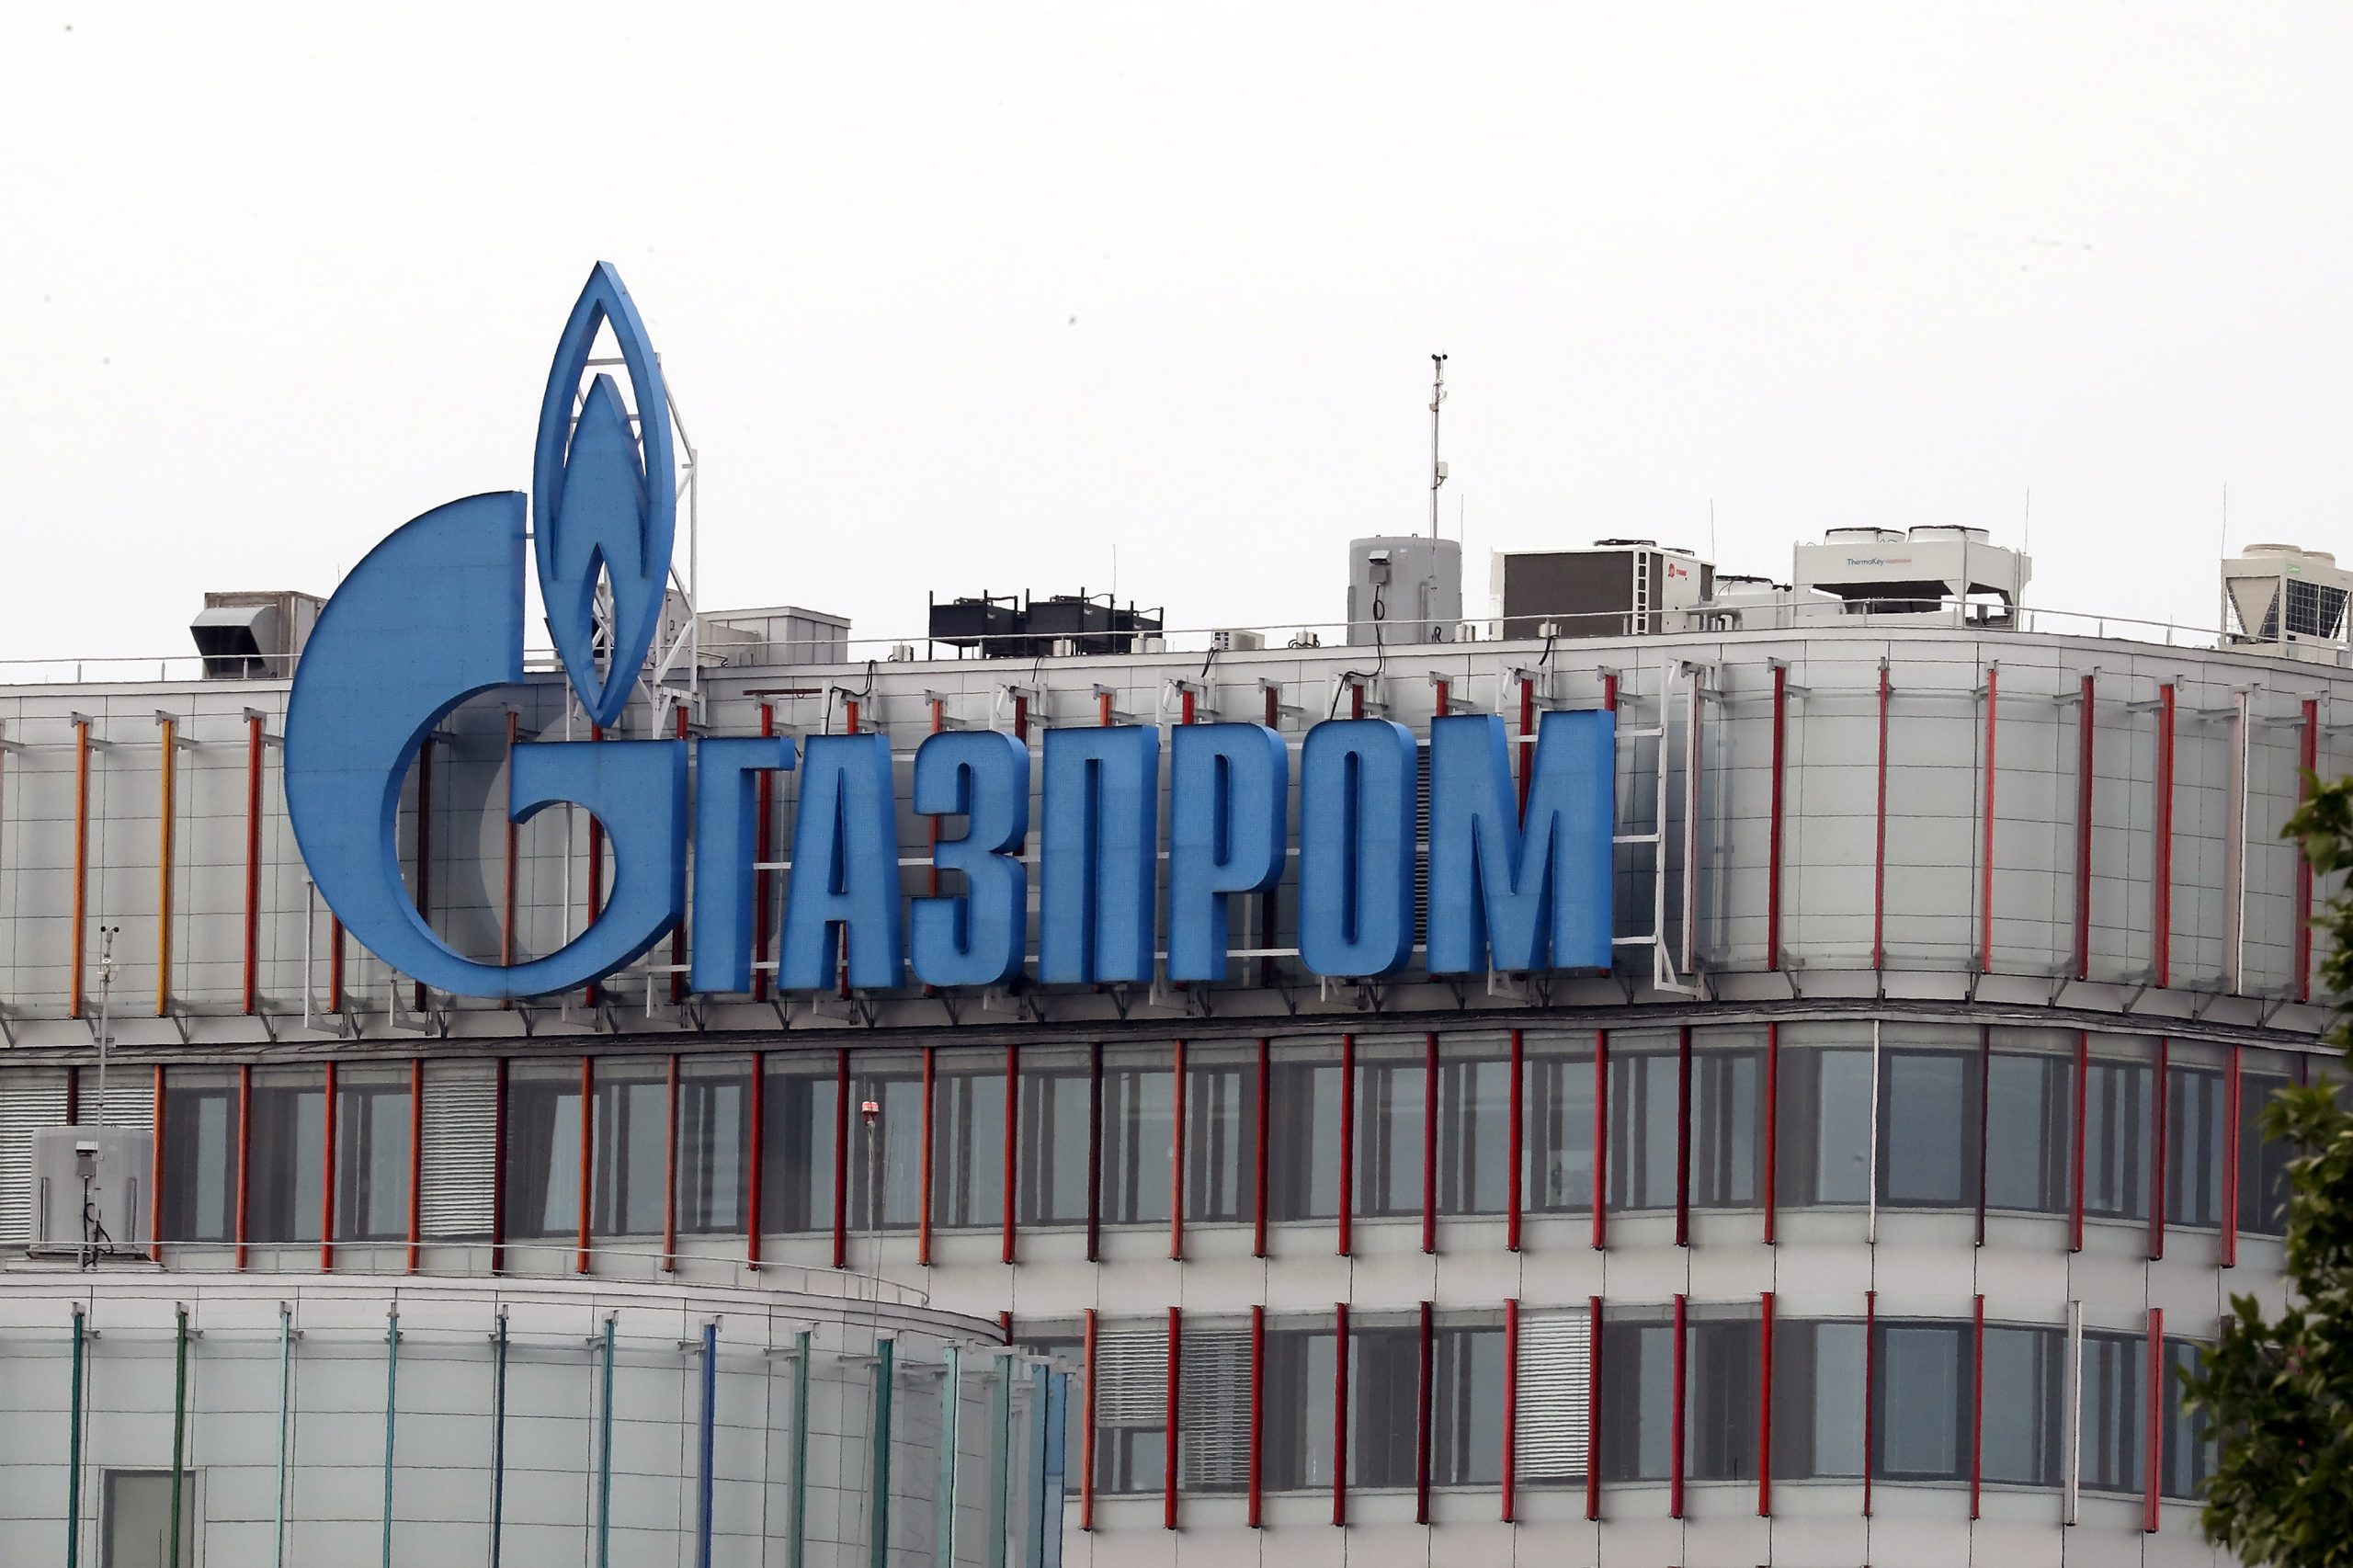 epa10093790 A Gazprom office in St. Petersburg, Russia, 27 July 2022. Russian energy giant Gazprom said on 25 July, citing problems with a turbine, that starting from 27 July the daily gas flow through the Nord Stream 1 pipeline will be set at 33 million cubic meters, just days after it resumed limited flows following a maintenance shutdown. The pipeline is the major delivery route for Russian gas to Europe.  EPA/ANATOLY MALTSEV